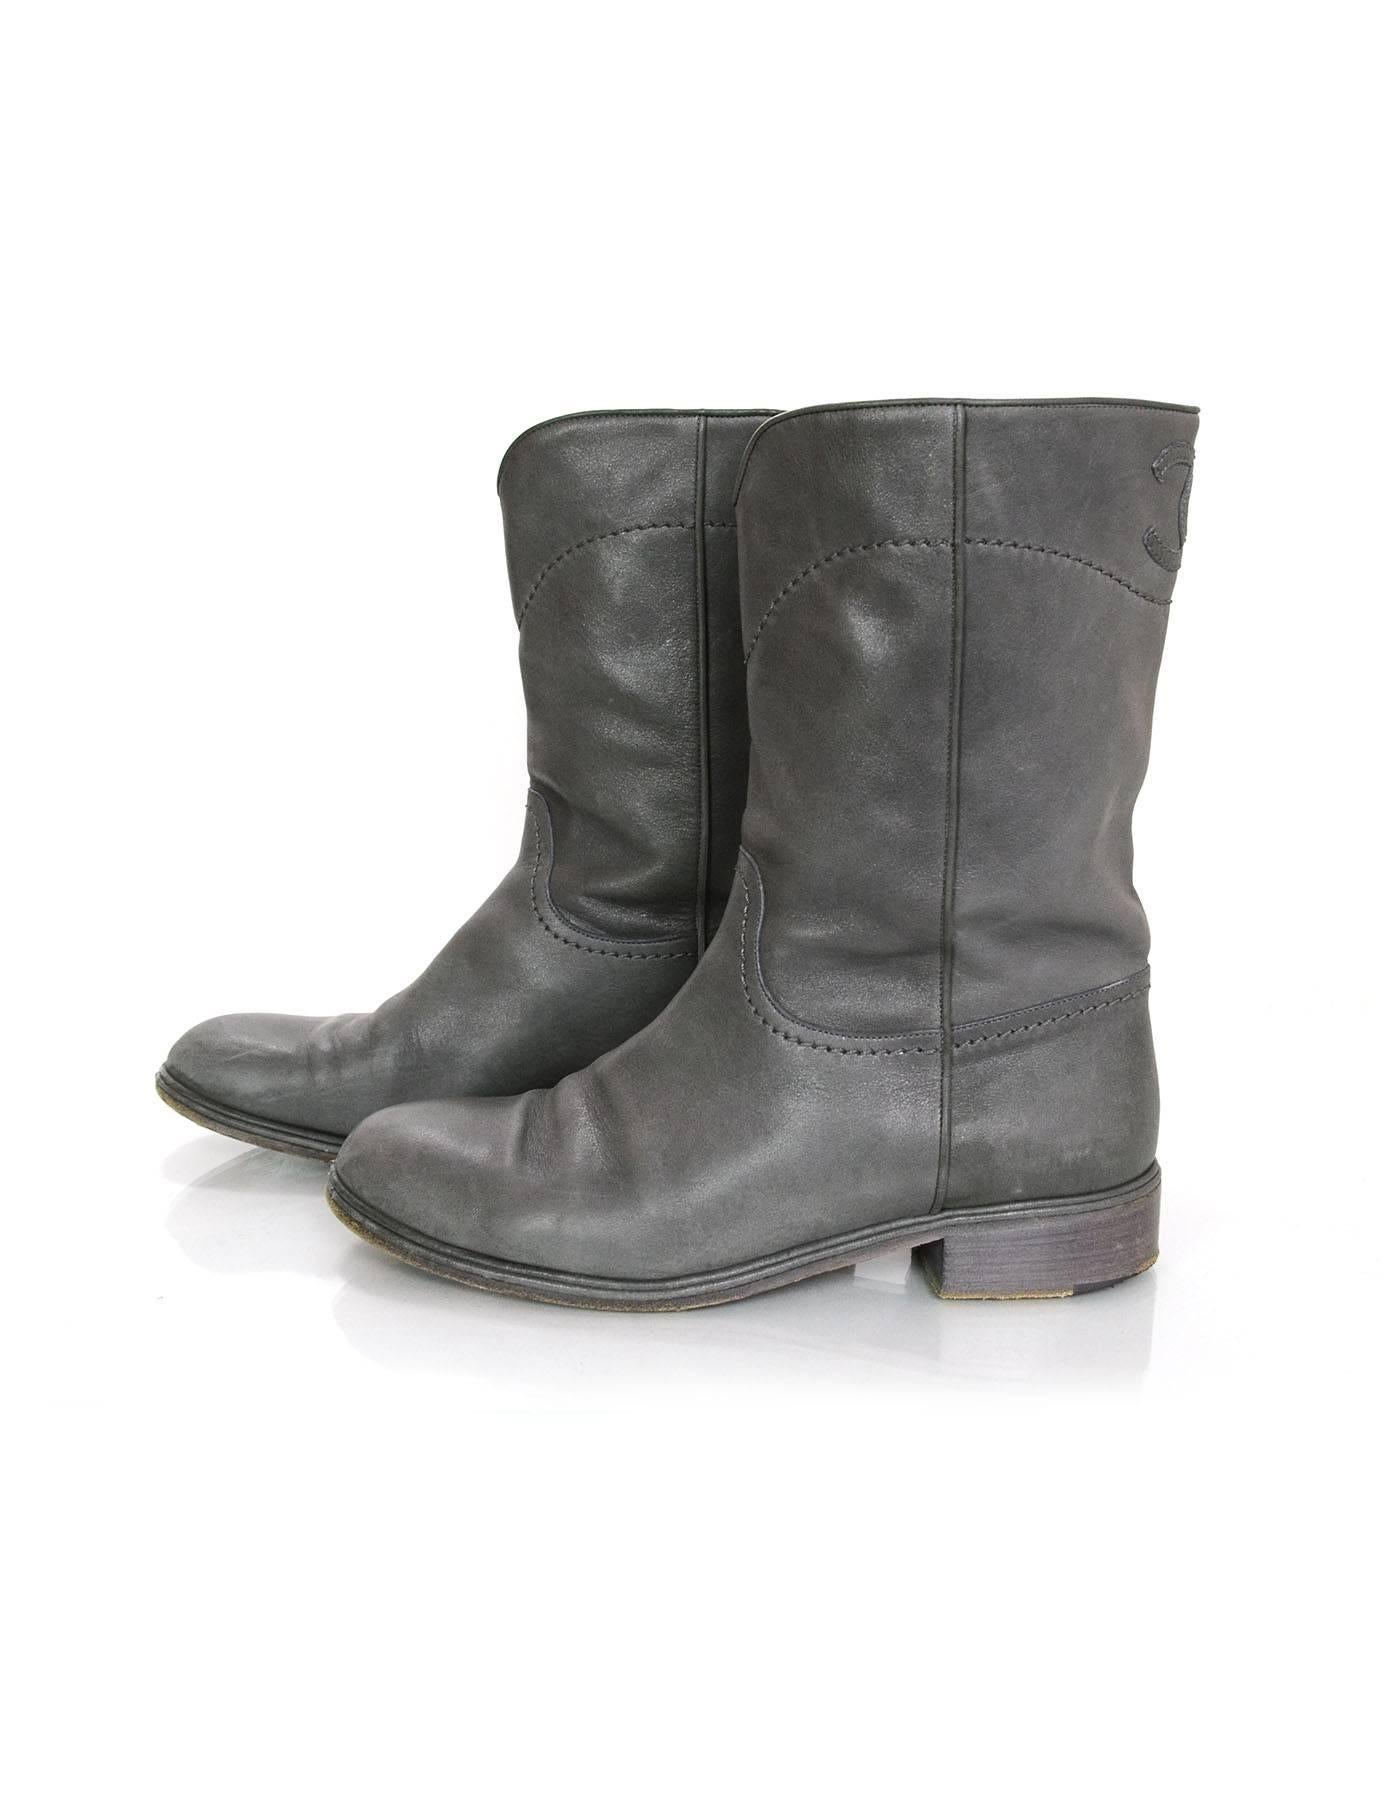 Chanel Grey Leather Calf-High Boots
Features stitched CC at back of boot shaft

Made In: Italy
Color: Grey
Materials: Leather
Closure/Opening: Pull on 
Sole Stamp: CC Made in Italy 41
Overall Condition: Very good pre-owned condition with the